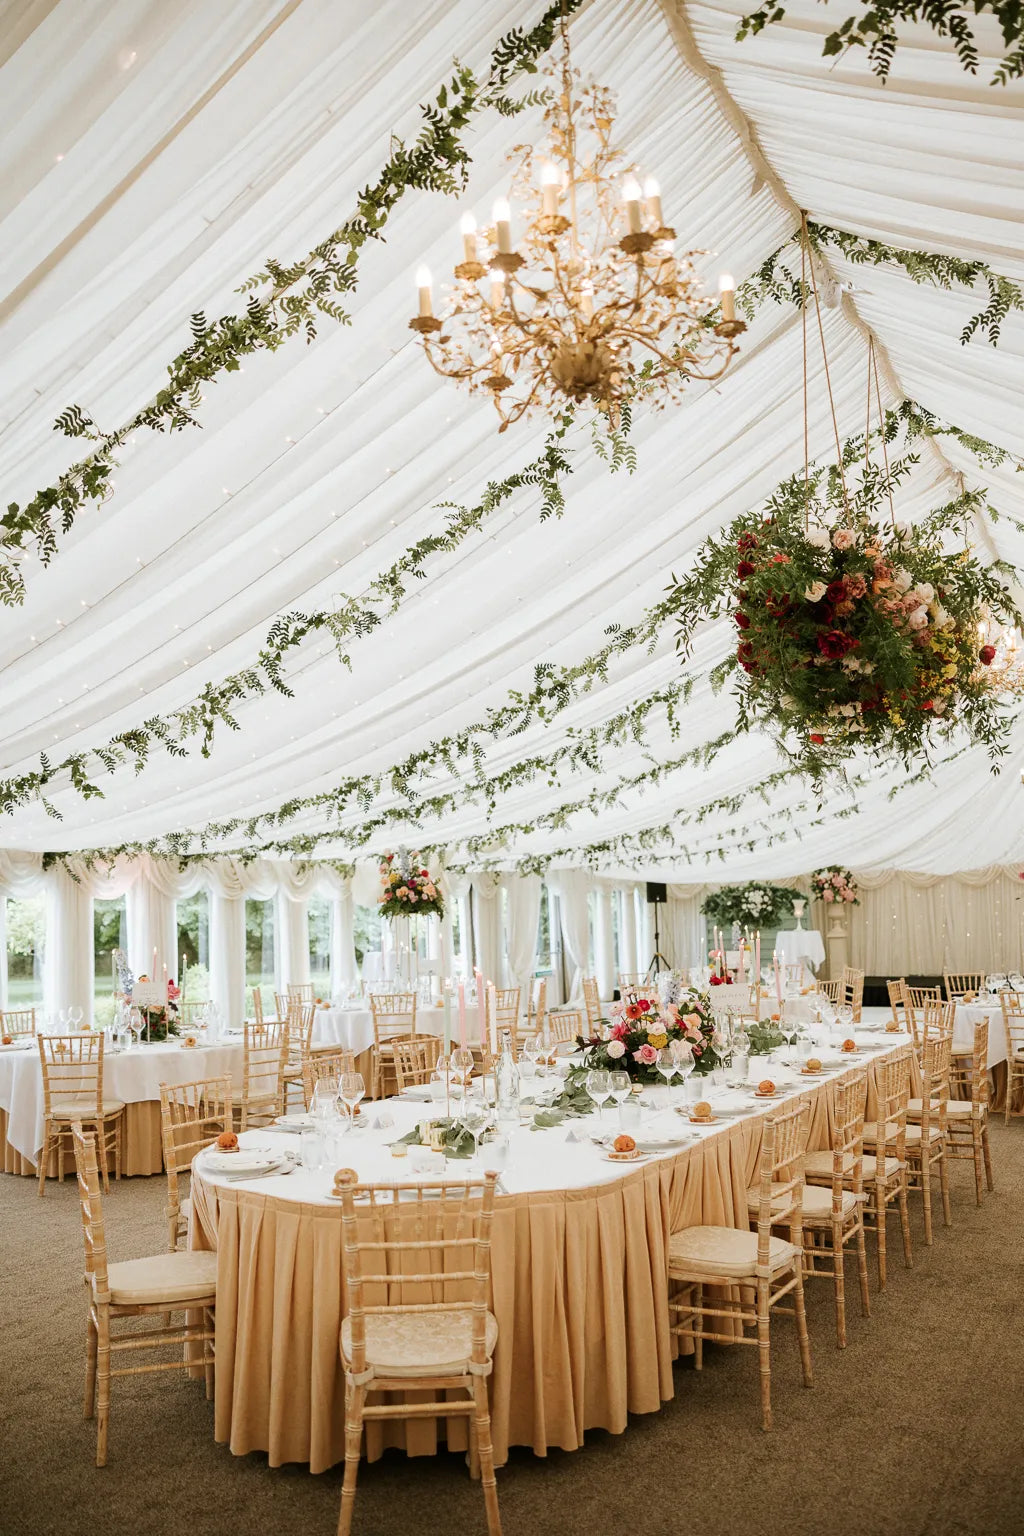 Choosing the Perfect Wedding Venue: Setting the Scene for Your Big Day